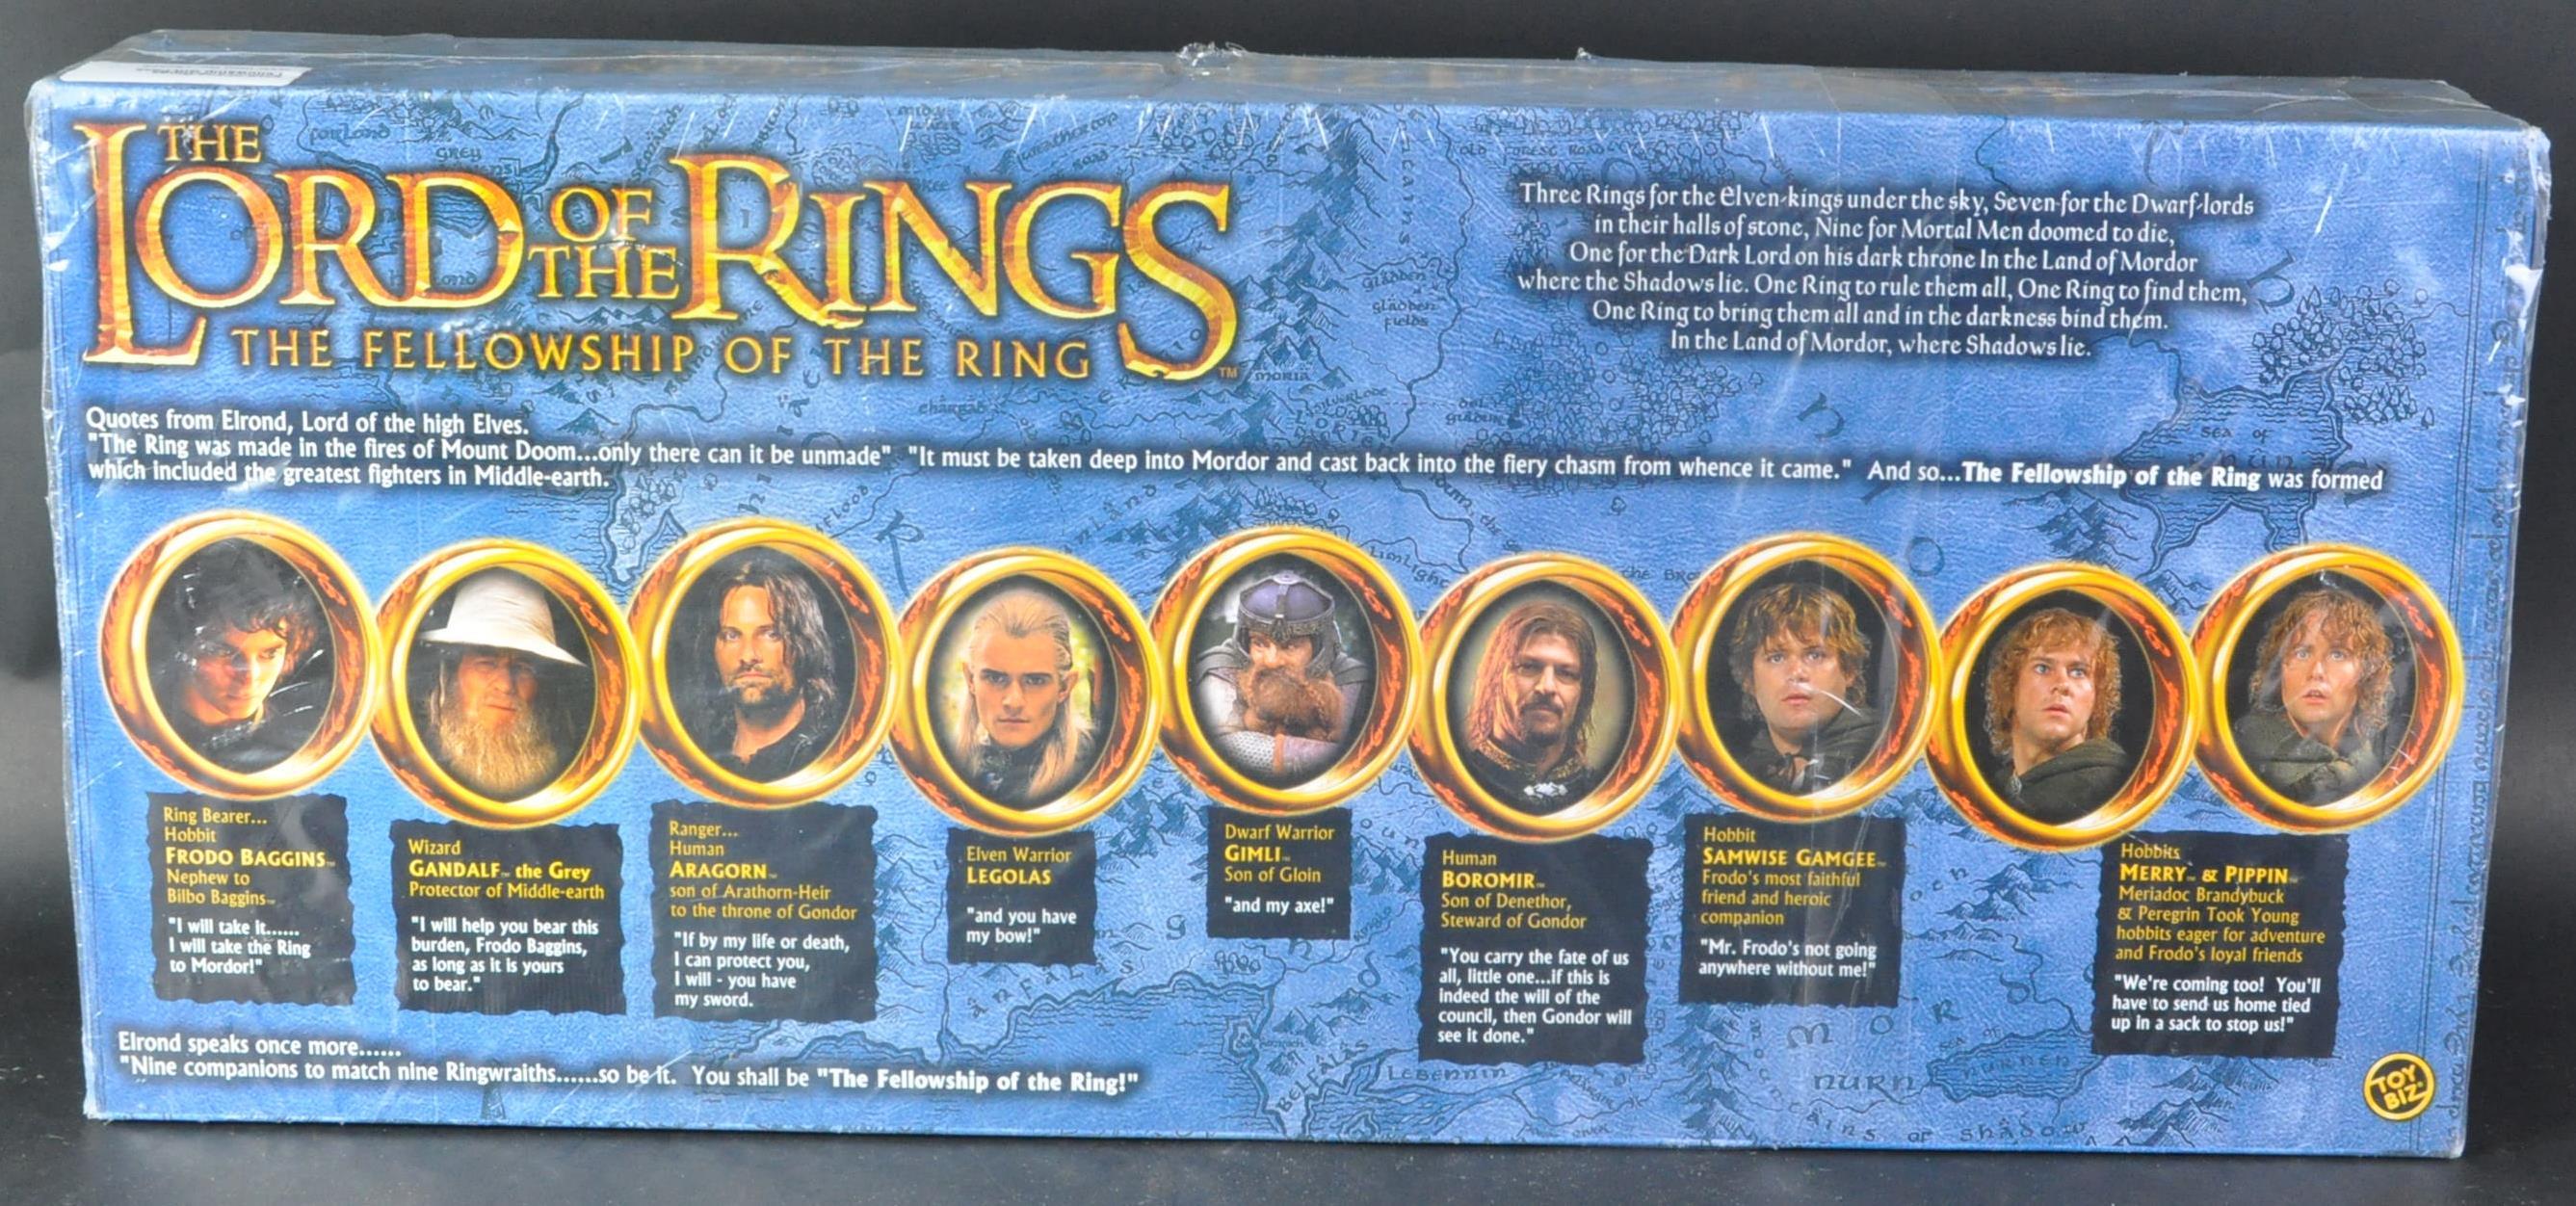 TOY BIZ LOTR LORD OF THE RINGS FELLOWSHIP OF THE RING ACTION FIGURES - Image 5 of 5